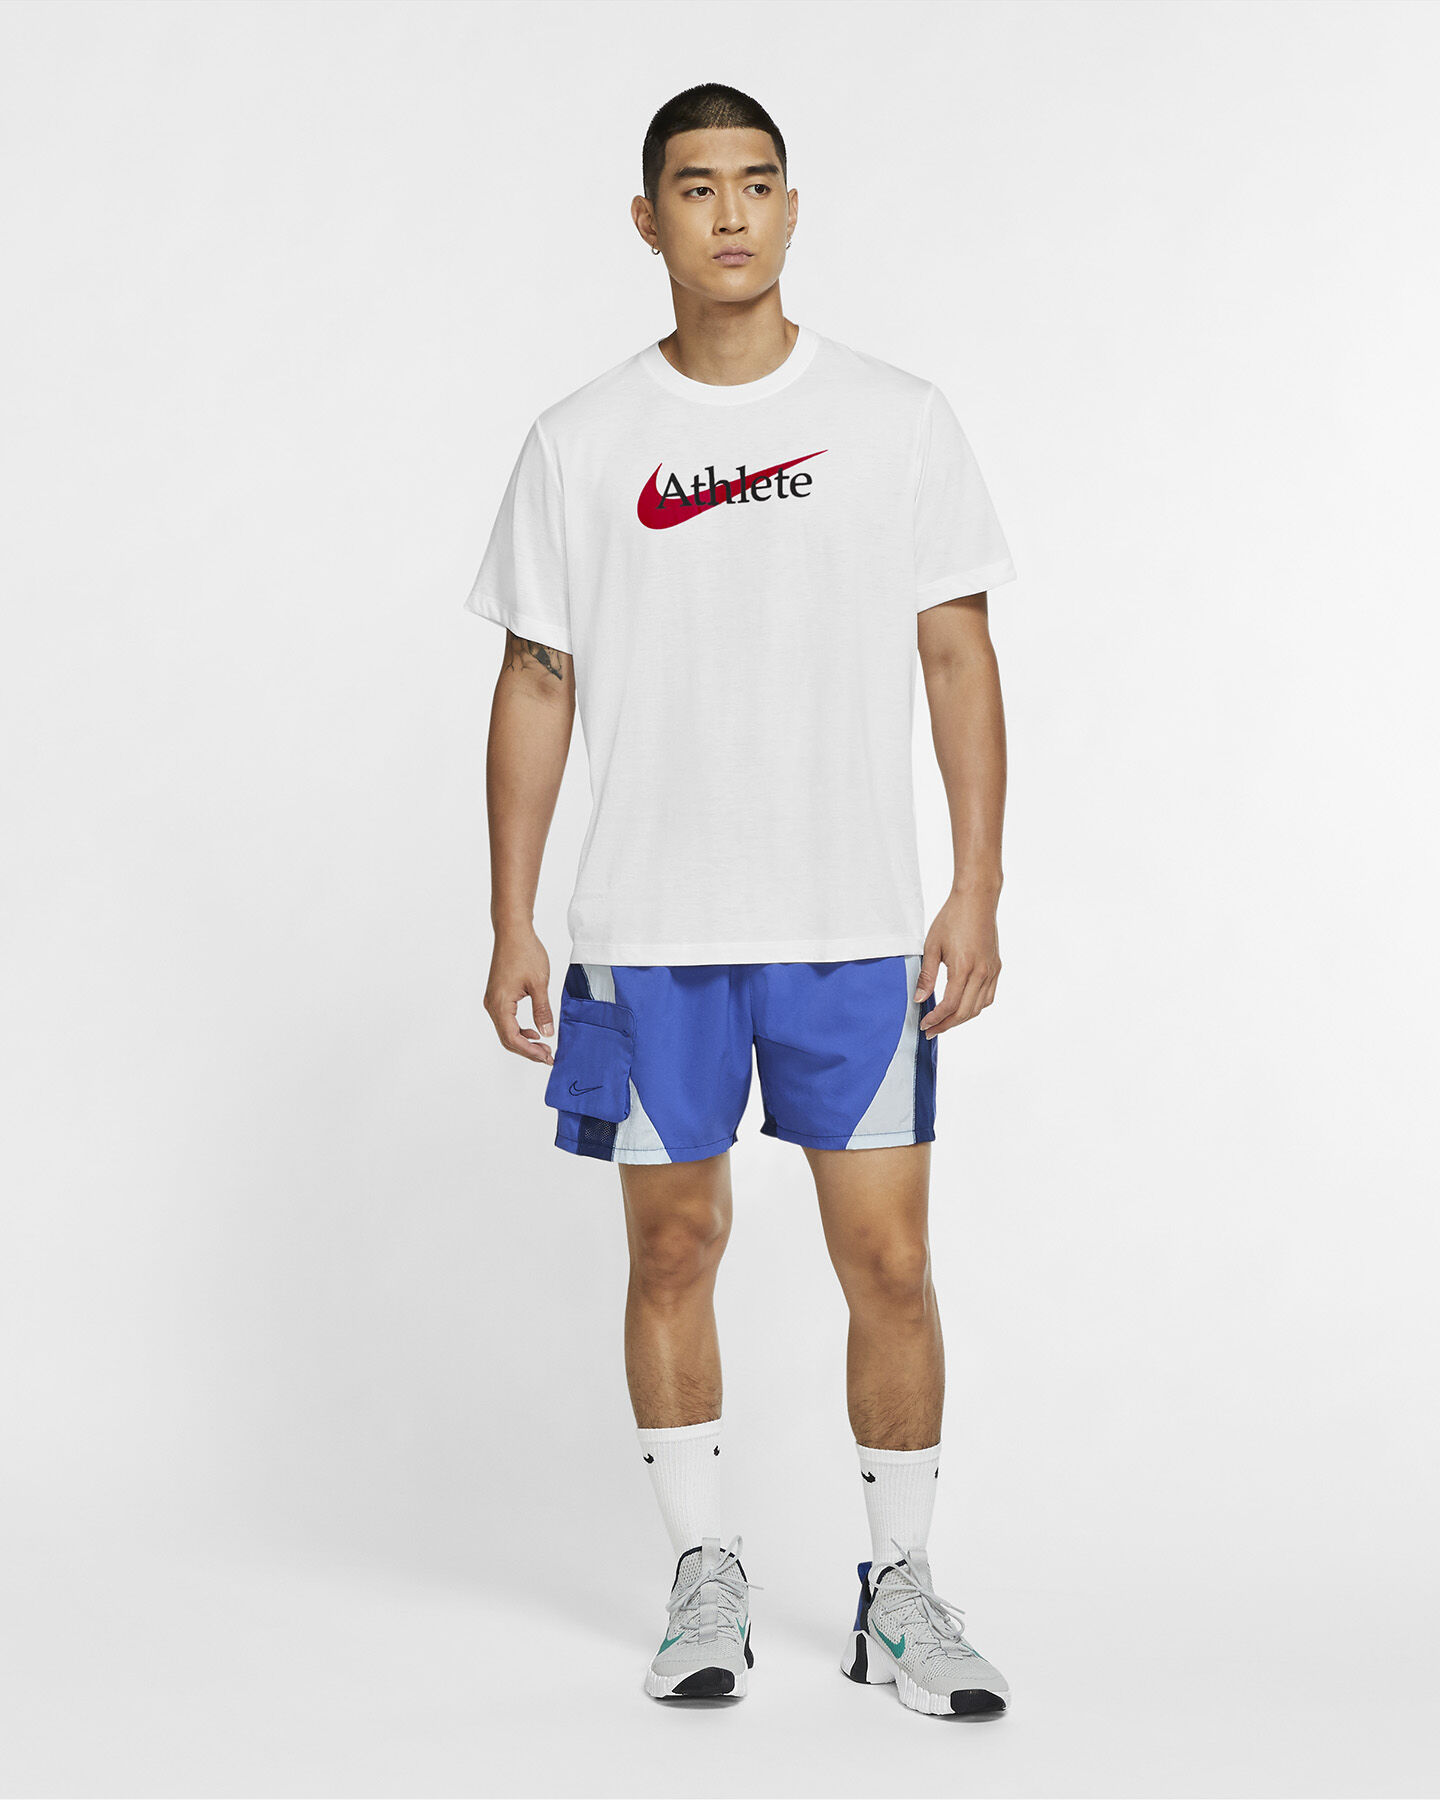  T-Shirt training NIKE ATHLETE M S5225933|100|S scatto 5